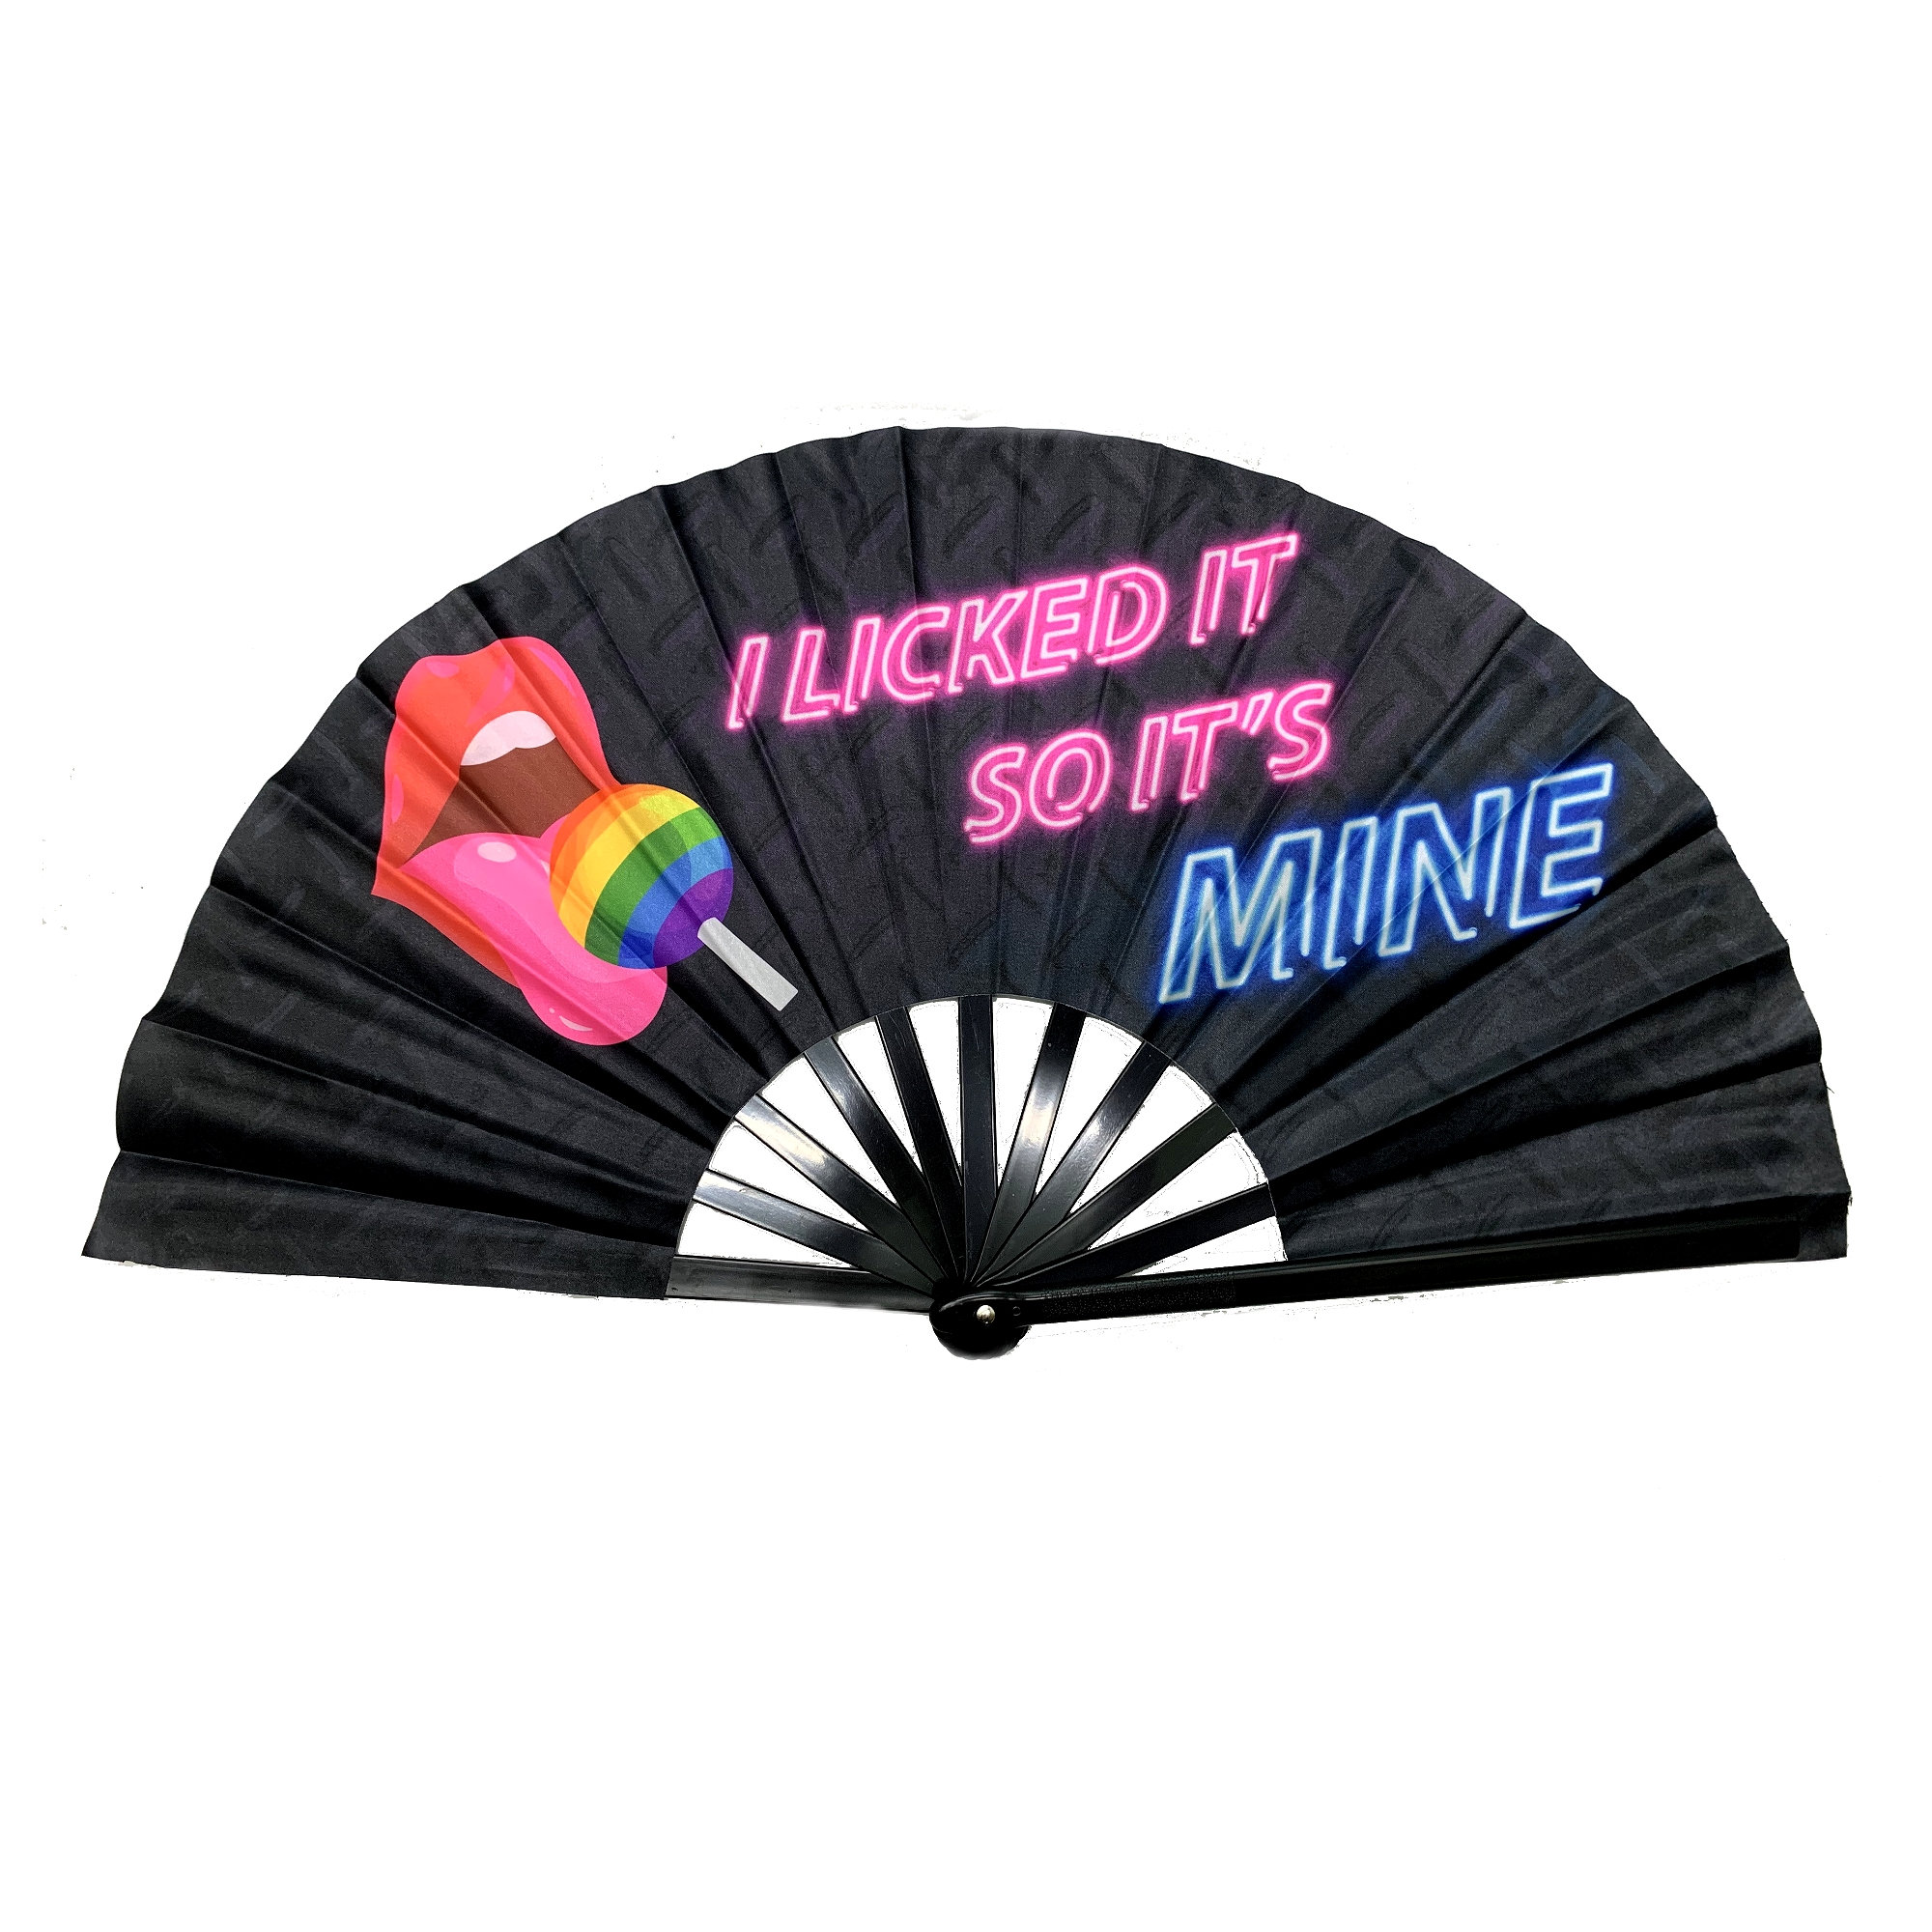  Show me your Tits hand fan foldable bamboo circuit hand fan  funny gag slang words expressions statement gifts Festival accessories Rave  handheld Circuit event fan Clack fans (Green) : Clothing, Shoes